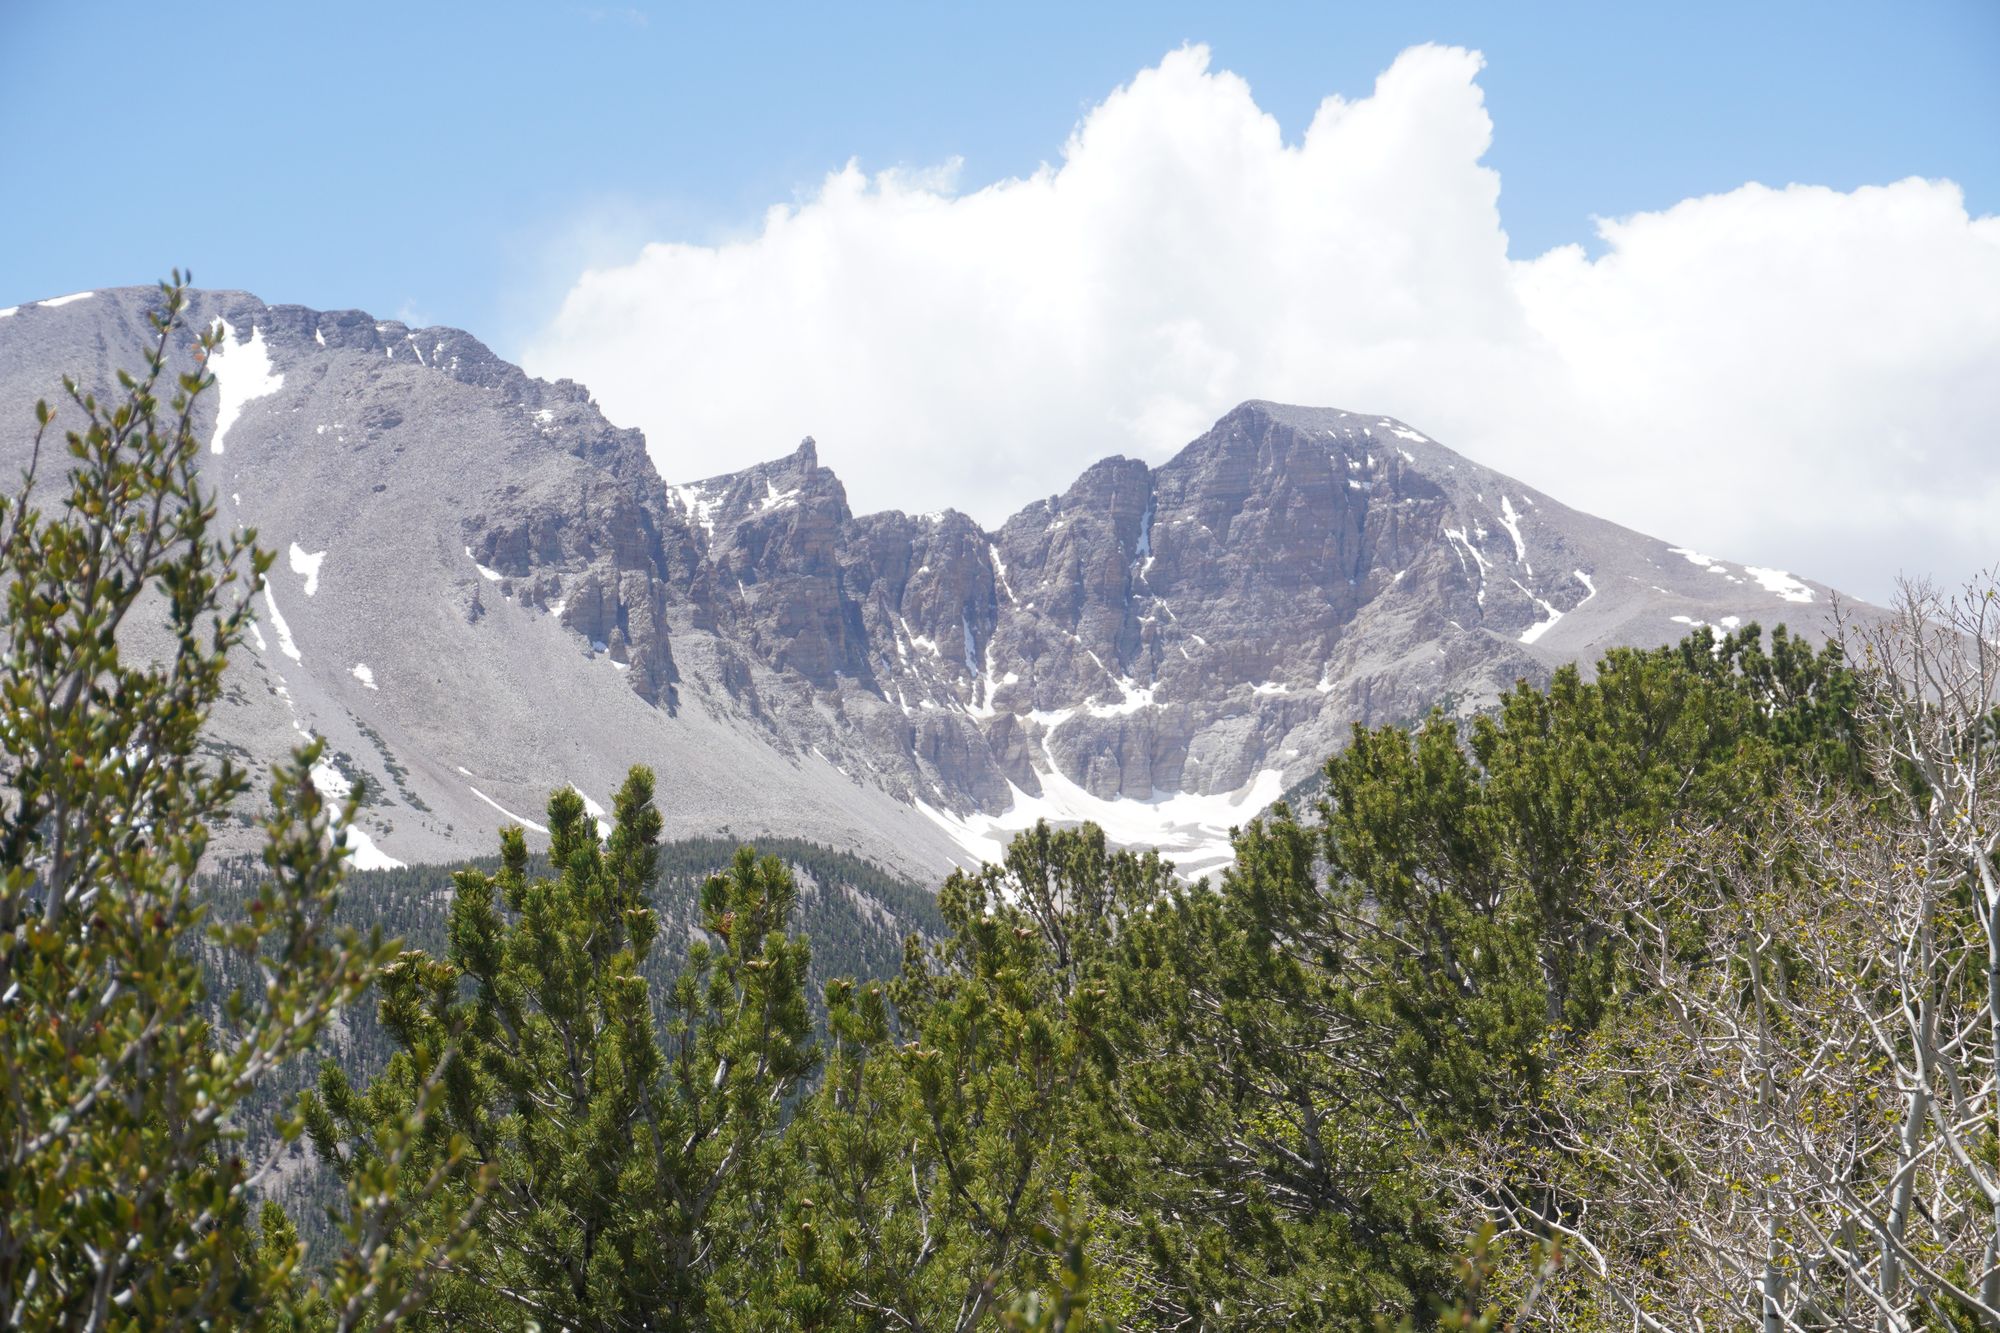 Backpacking in Great Basin National Park